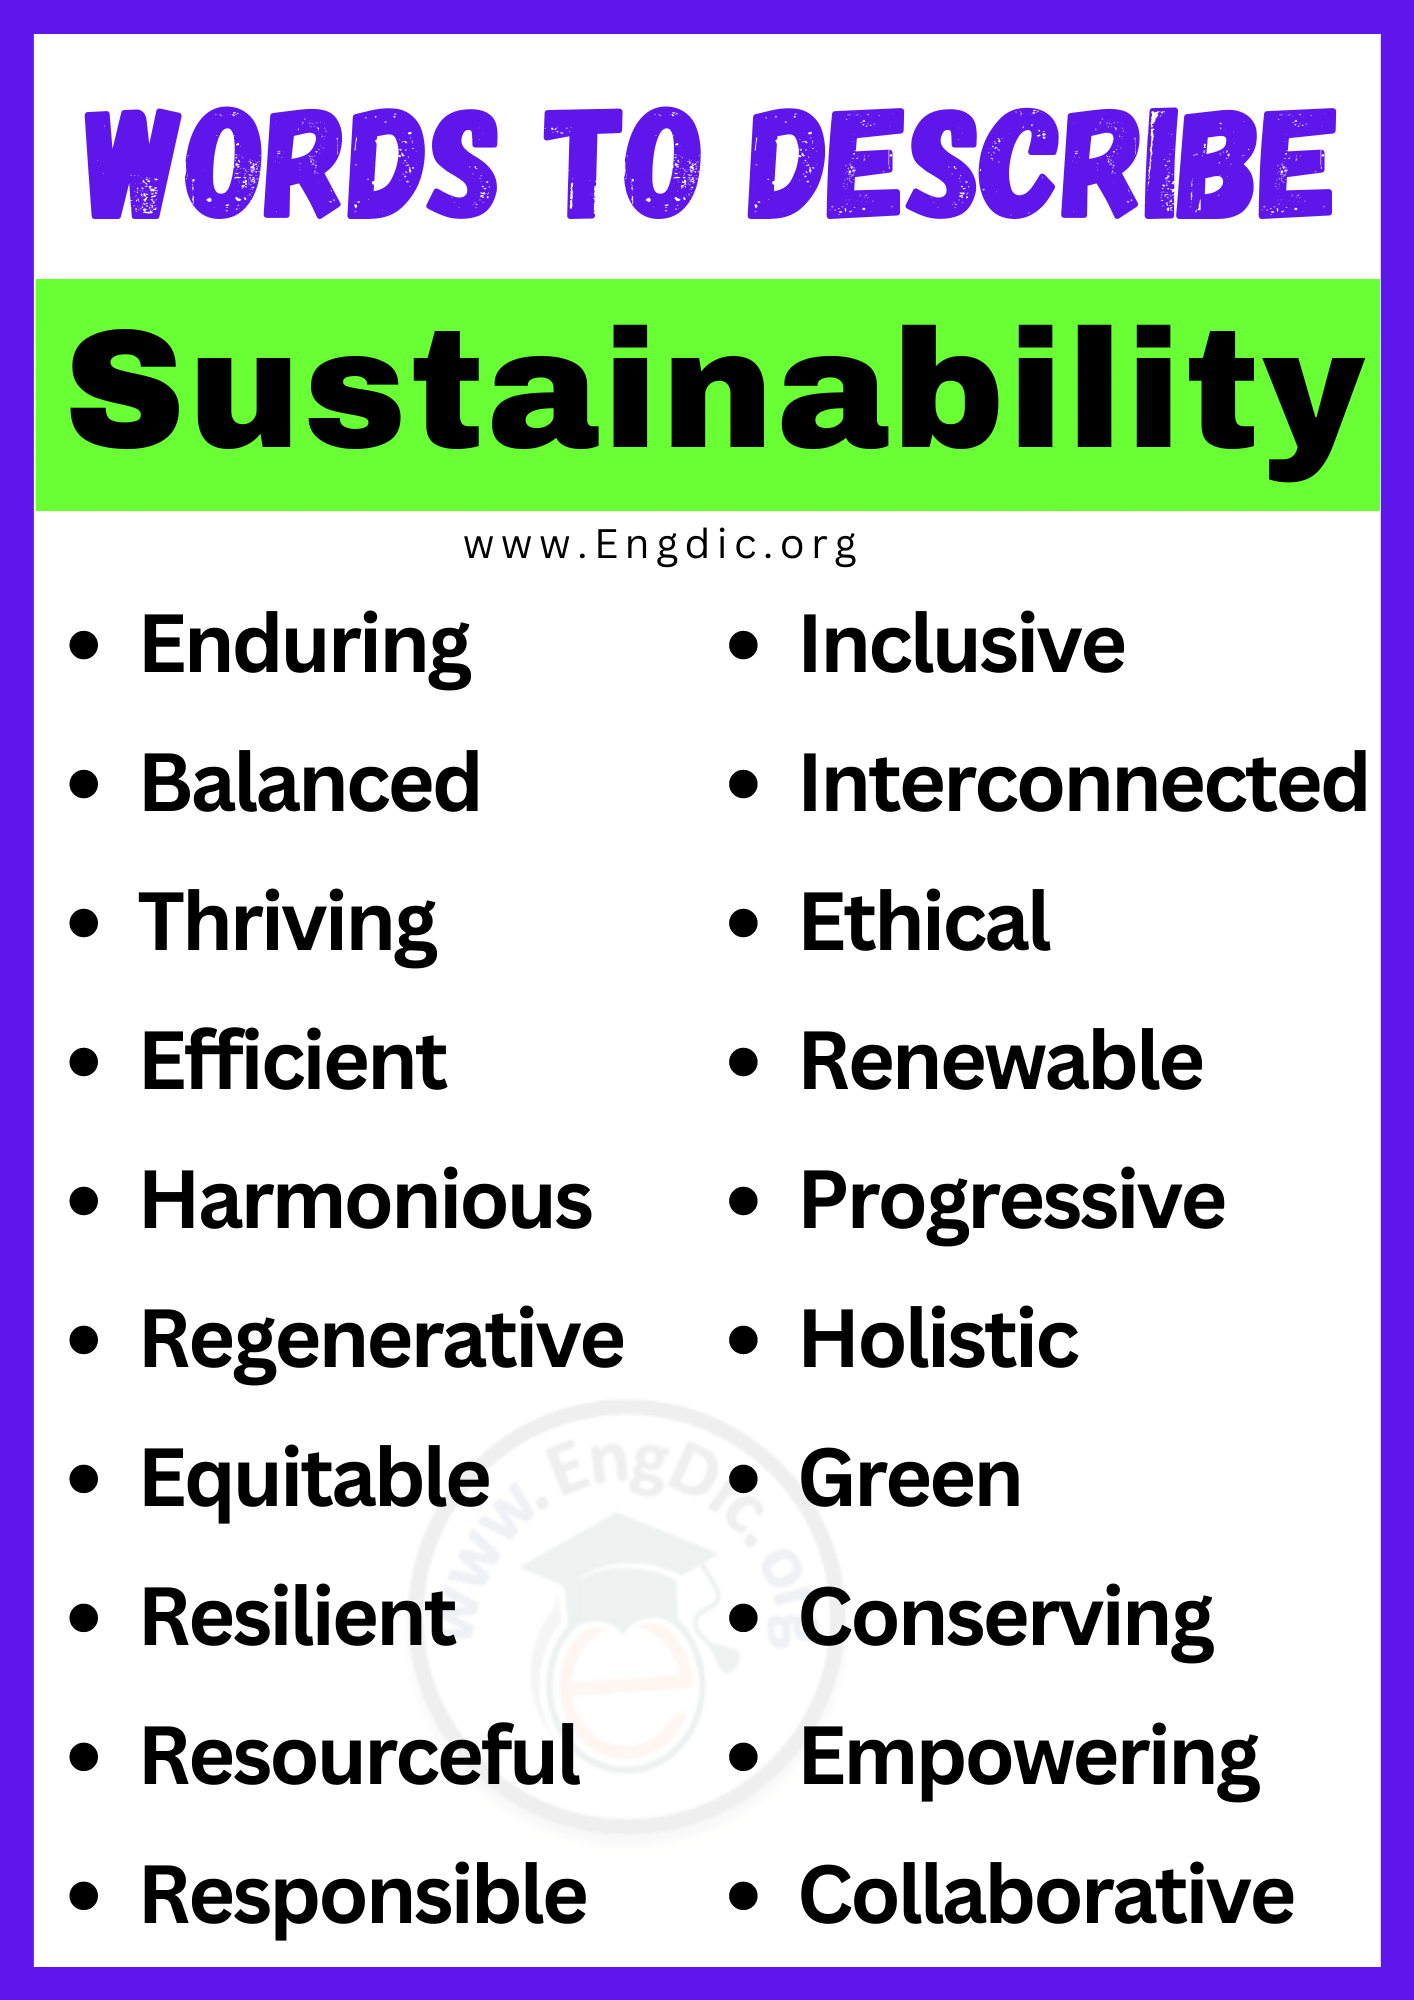 Words to Describe Sustainability